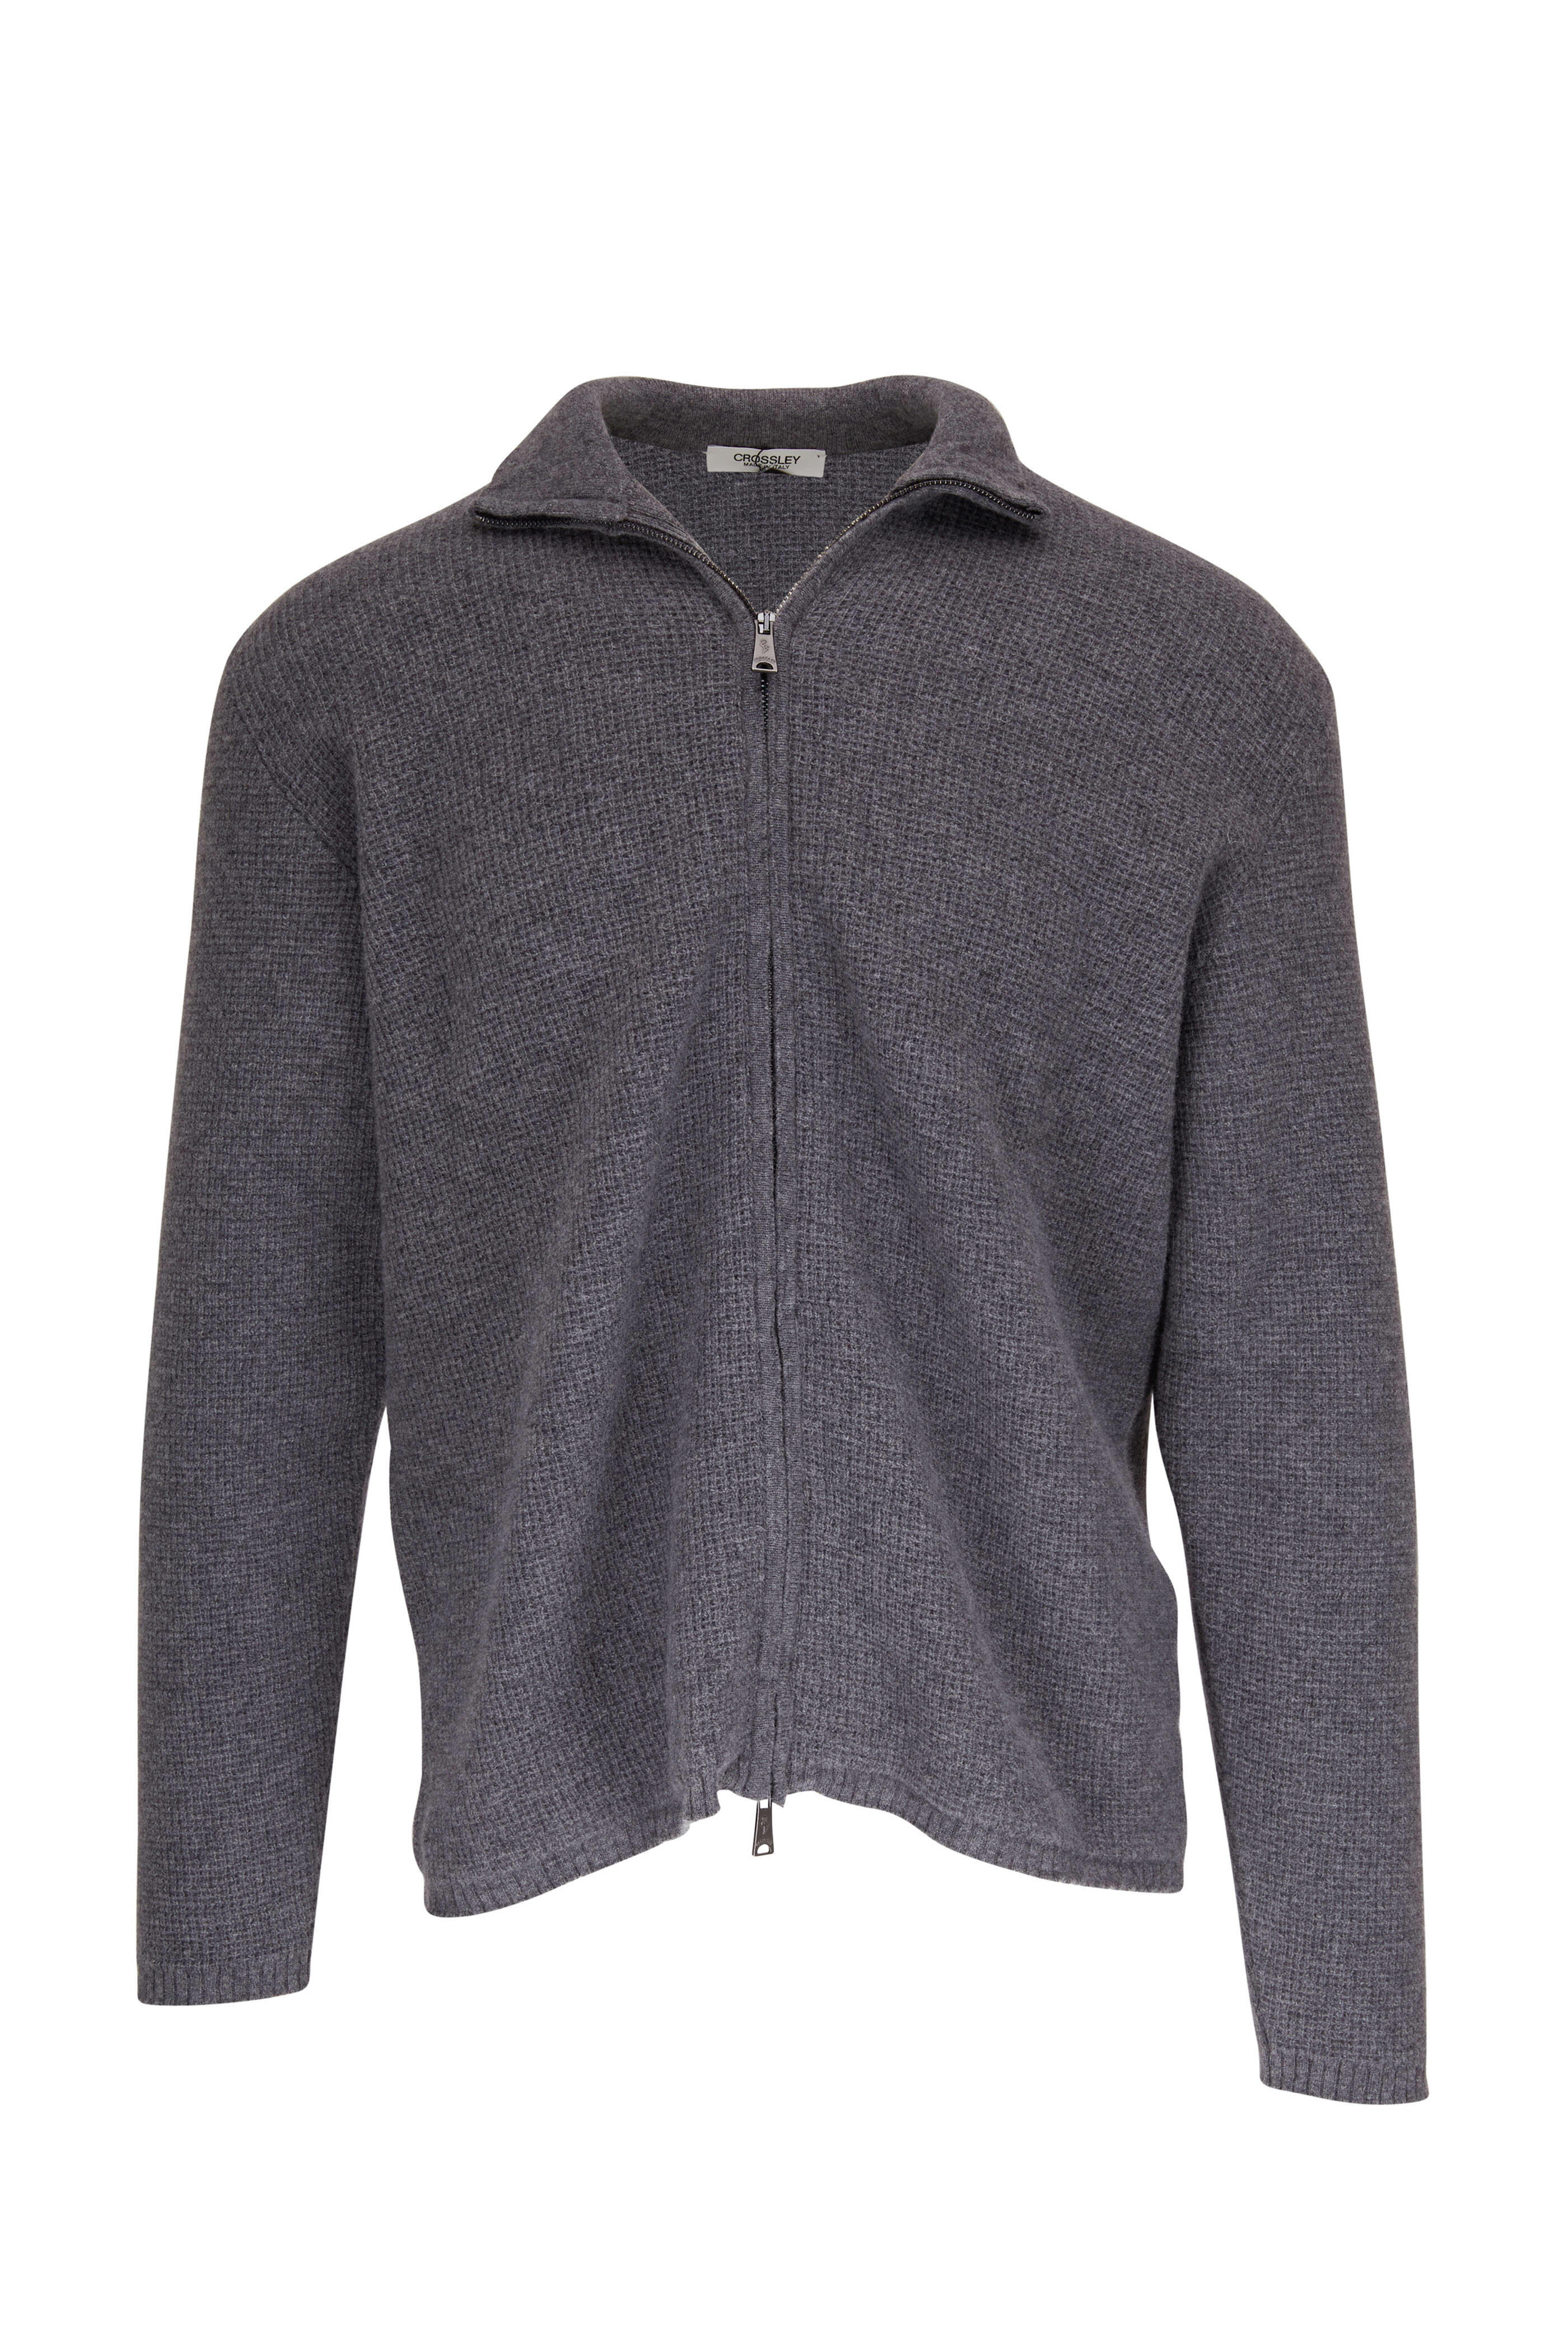 Crossley - Solid Gray Microwaffle Full Zip | Mitchell Stores